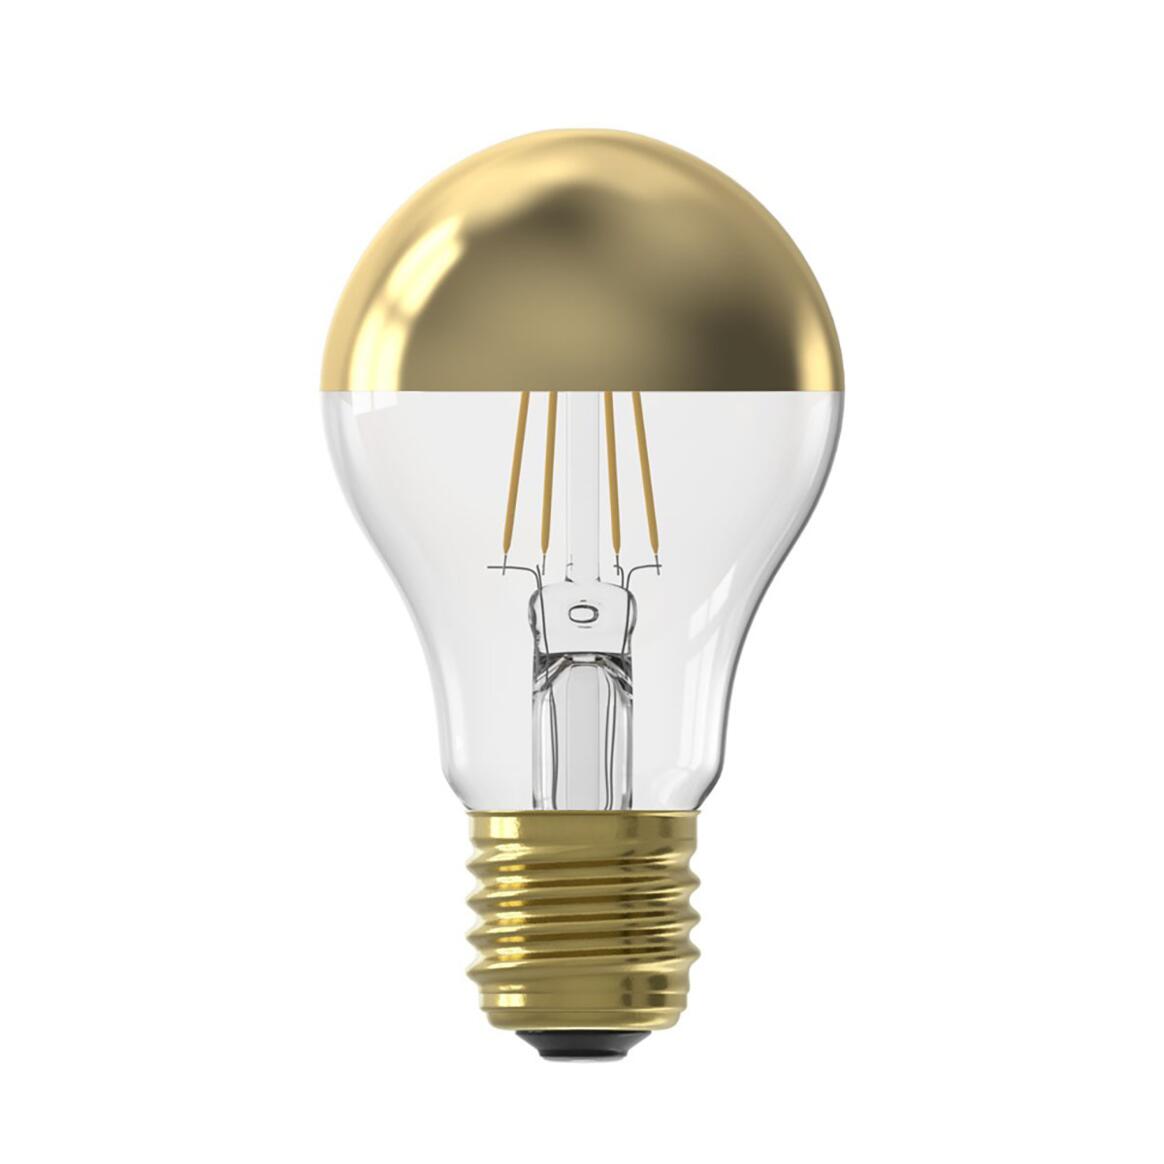 LED Filament Gold Mirror Top Light Bulb Dimmable E27 4W 1800K 180lm 6cm main product image